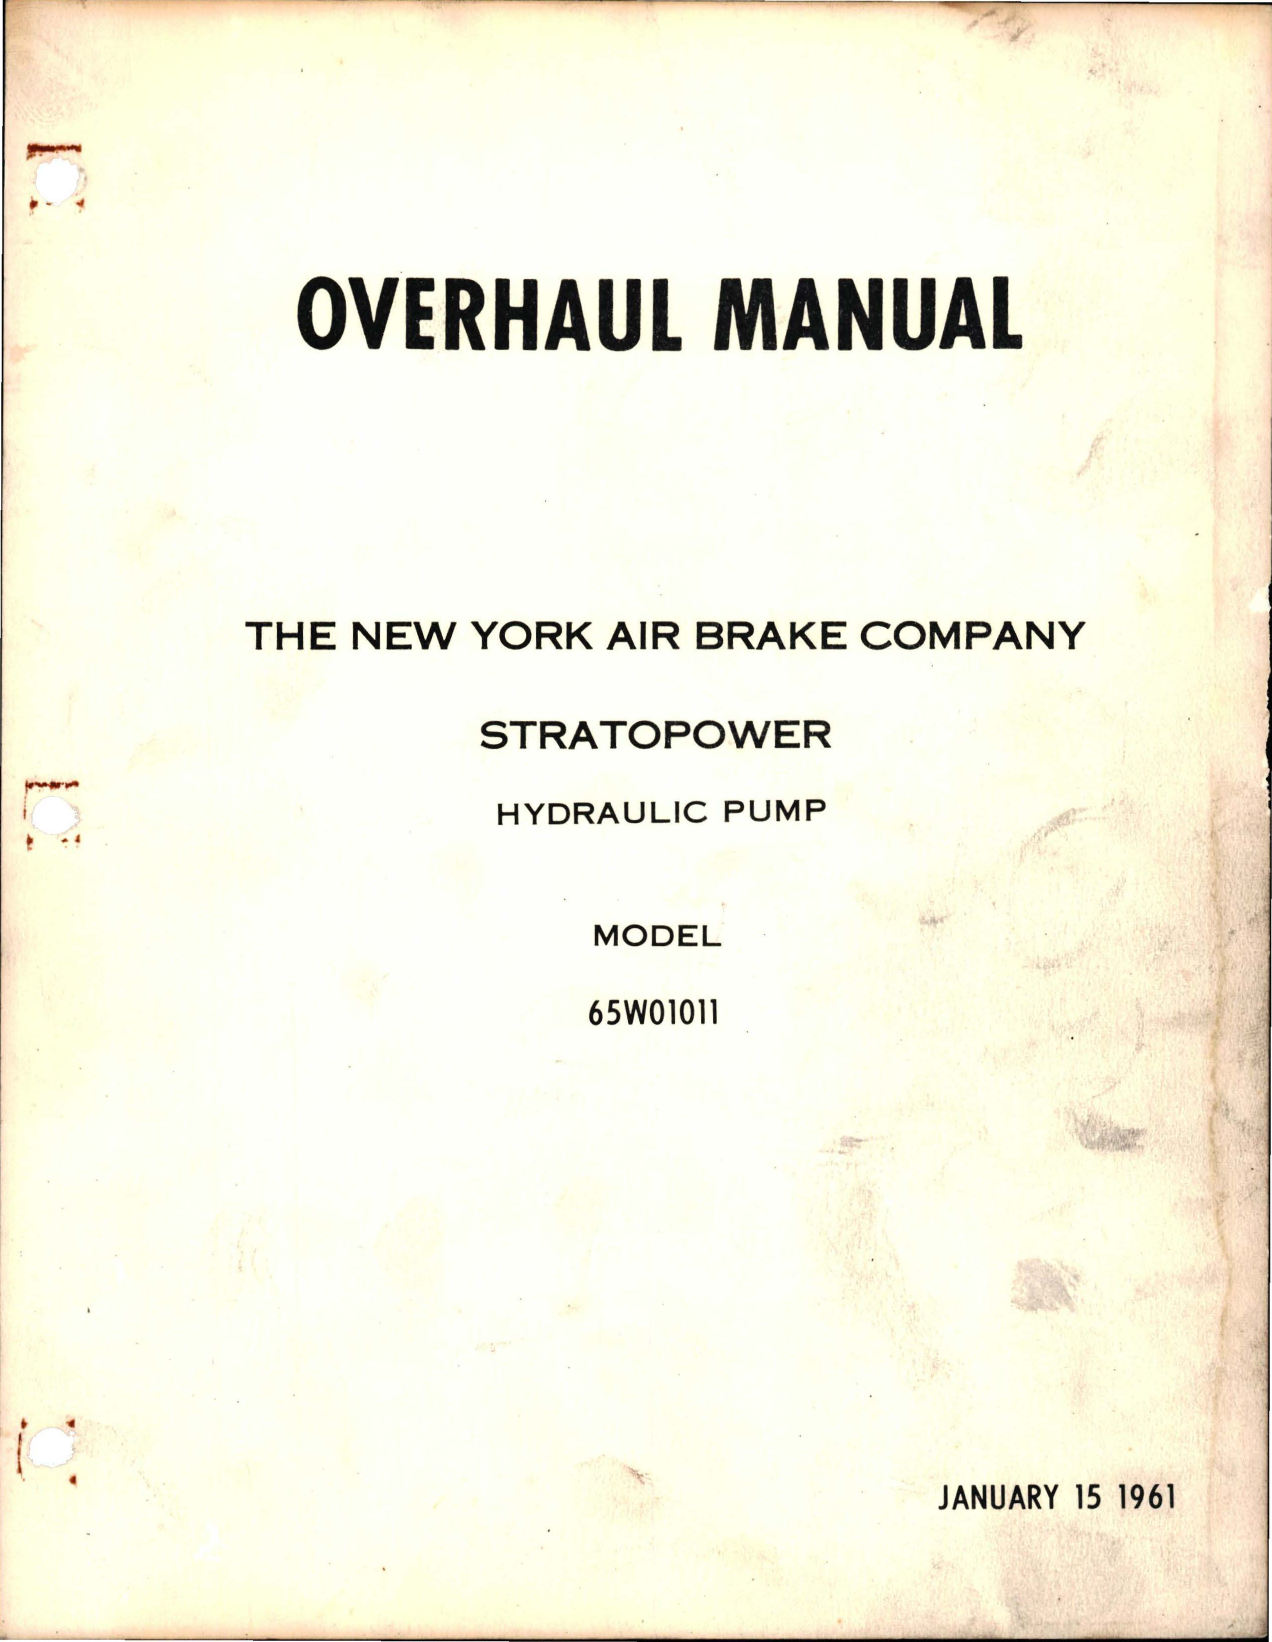 Sample page 1 from AirCorps Library document: Overhaul Manual for Stratopower Hydraulic Pump - Model 65W01011 